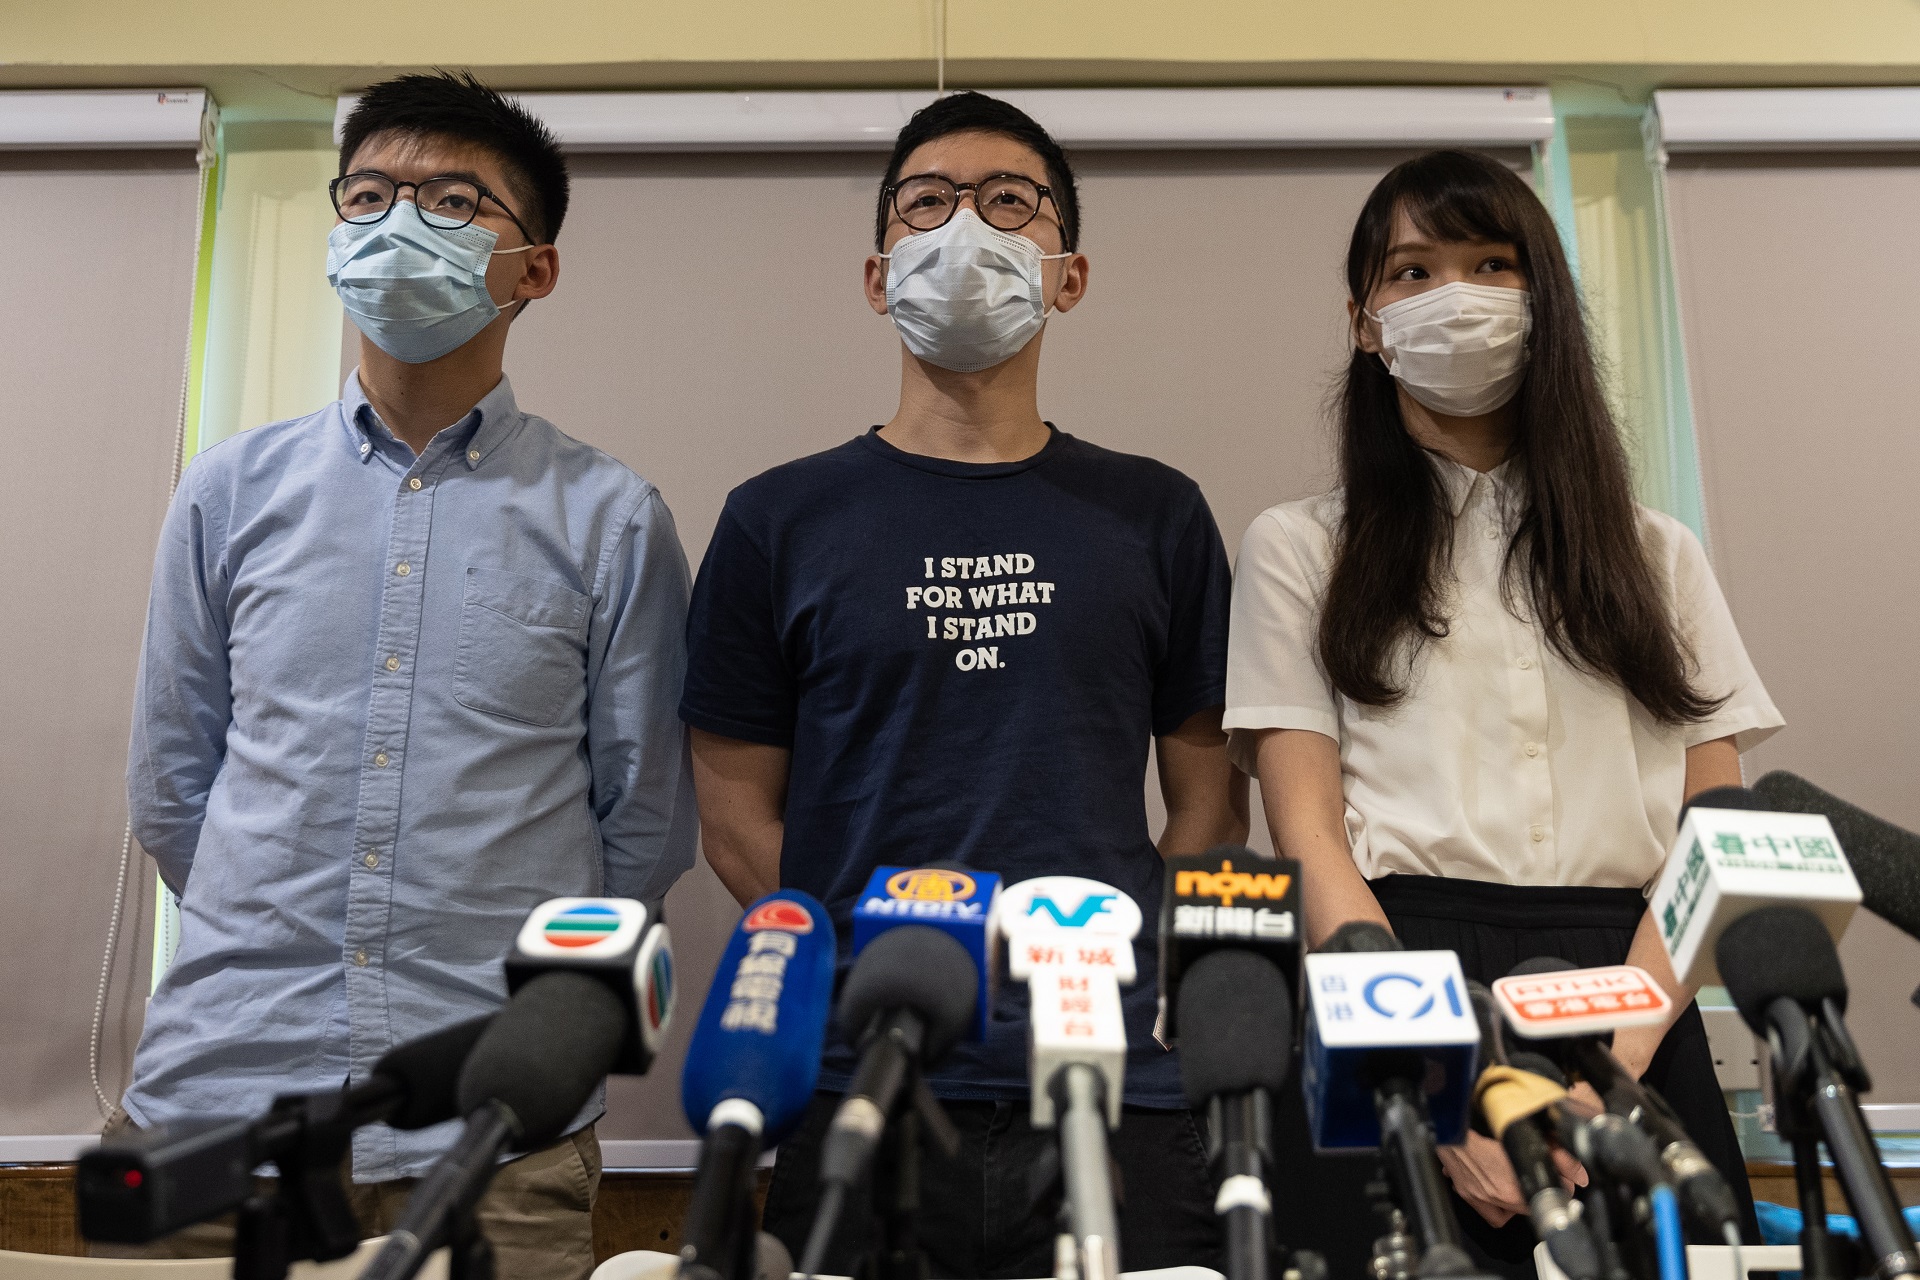 epa08516928 (FILE) - Members of the pro-democracy political group Demosisto, Joshua Wong (L), Nathan Law (C) and Agnes Chow (R) speak during a press conference in Hong Kong, China, 30 May 2020 (reissued 30 June 2020). The three members of Demosisto on 30 June announced quitting the Hong Kong pro-democracy group shortly after media reported that China had passed the controversial national security law.  EPA/JEROME FAVRE